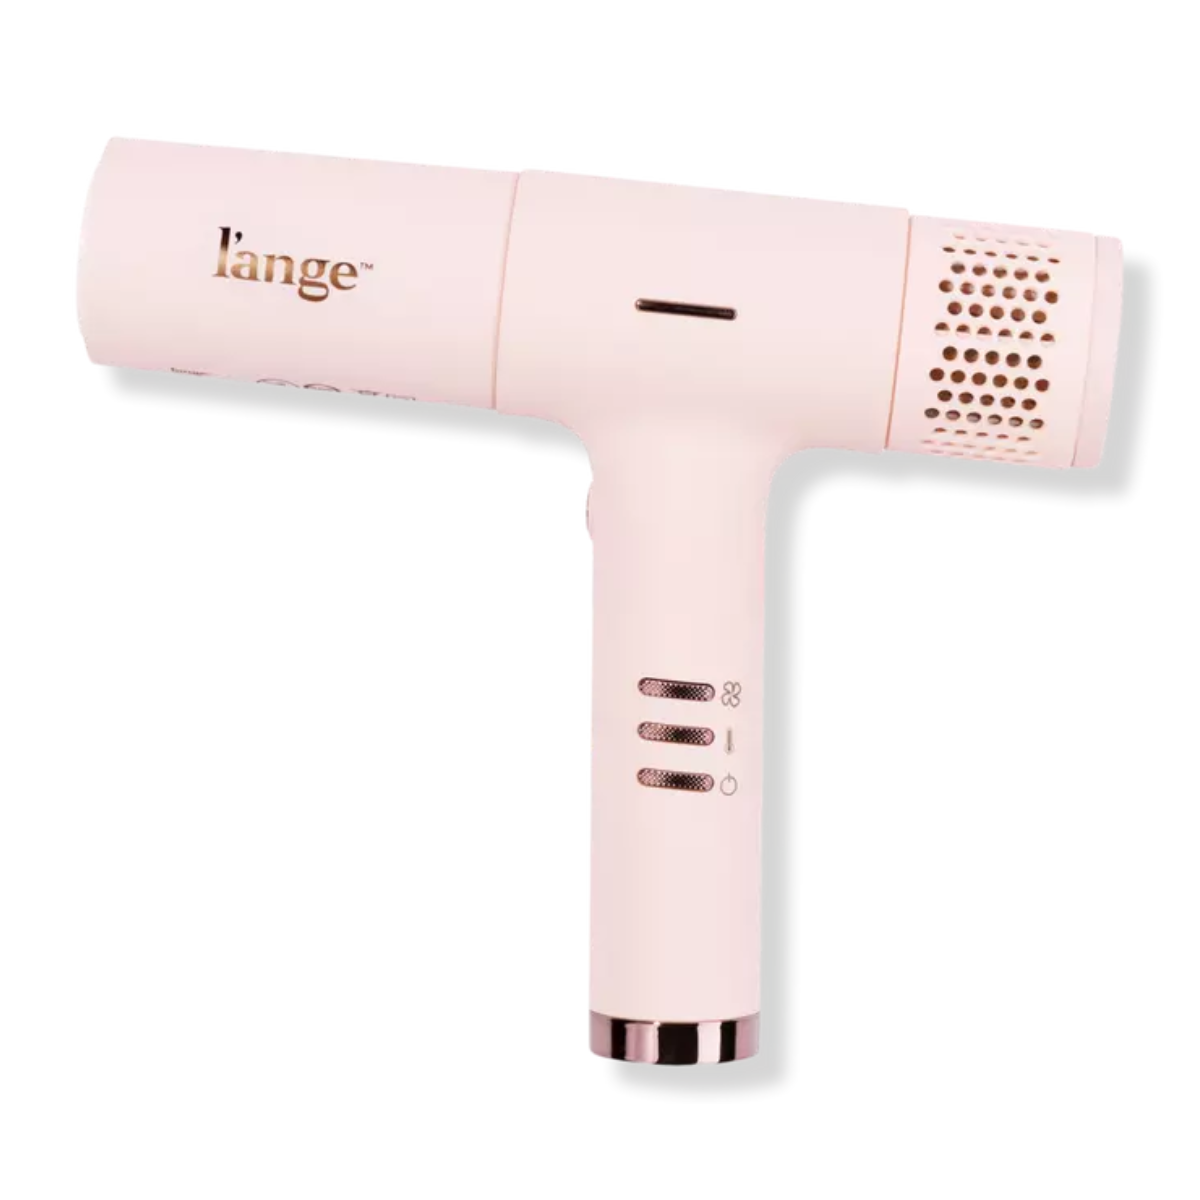 <p>It may be bigger than other travel-size hair dryers, but the slim design sets this apart from other full-sized options, making it a worthy contender for your suitcase. Perfect for the person who wants to use the same dryer at home and on the go, this cutie weighs under a pound and is ergonomically designed to be more comfortable in hand. And despite its high-performance motor, the dryer is exceptionally quiet. It also features an LCD display, so you know exactly what settings you’re using. Did we mention it comes with a diffuser and <em>two</em> air concentrators?</p> <ul> <li><strong>Pros:</strong> Very quiet, slim design, lightweight, comes with attachments</li> <li><strong>Cons:</strong> Expensive, not dual-voltage</li> <li><strong>Weight</strong>: 0.9 pounds</li> <li><strong>Dual Voltage:</strong> No</li> </ul> <p><em>Save when you shop the best travel hair dryers with these <a href="https://www.glamour.com/coupons/ulta?mbid=synd_msn_rss&utm_source=msn&utm_medium=syndication">Ulta promo codes</a>.</em></p> $245, Ulta. <a href="https://www.ulta.com/p/le-styliste-luxe-digital-salon-dryer-pimprod2032008">Get it now!</a><p>Sign up for today’s biggest stories, from pop culture to politics.</p><a href="https://www.glamour.com/newsletter/news?sourceCode=msnsend">Sign Up</a>